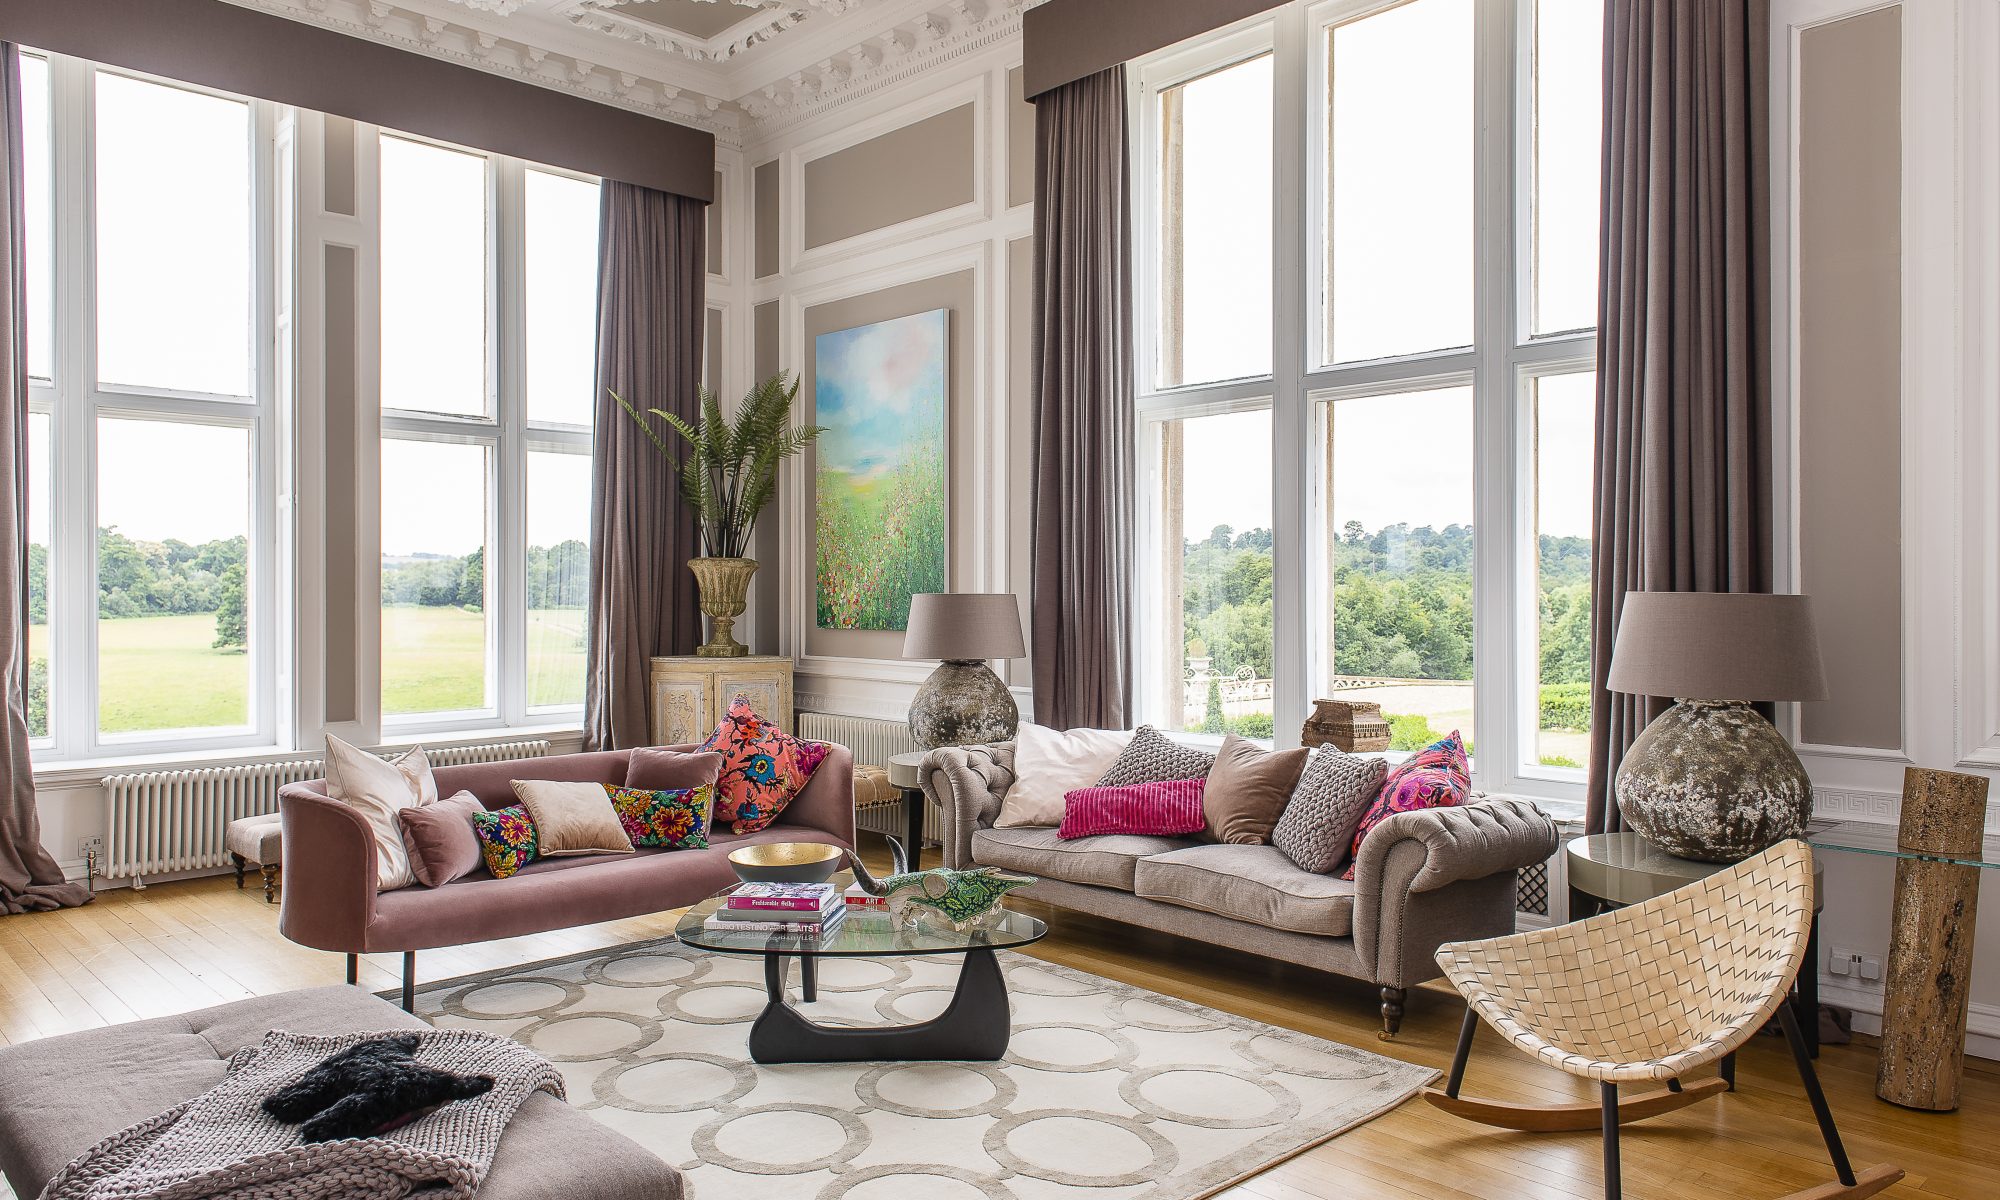 In the sitting room, Jaime has kept the colour palette to neutral greys and browns with white detailing. The double aspect windows take centre stage, with beautiful views out over the Bayham gardens